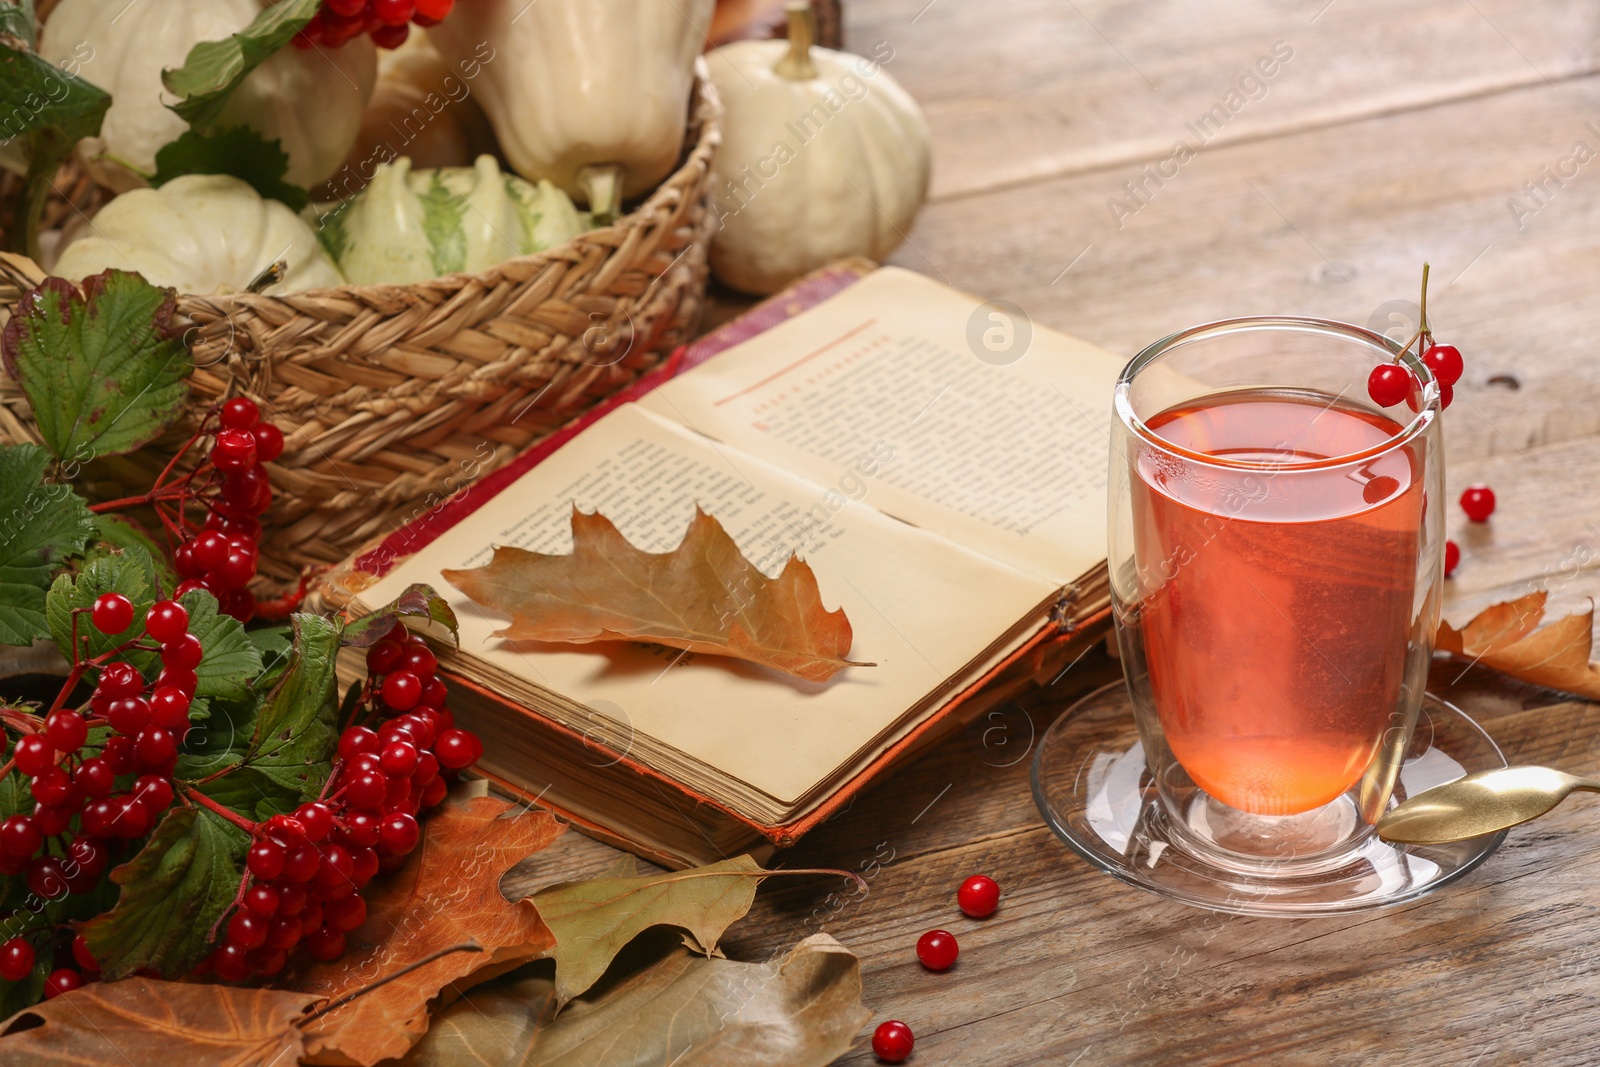 Photo of Delicious viburnum tea, books and pumpkins on wooden table. Cozy autumn atmosphere